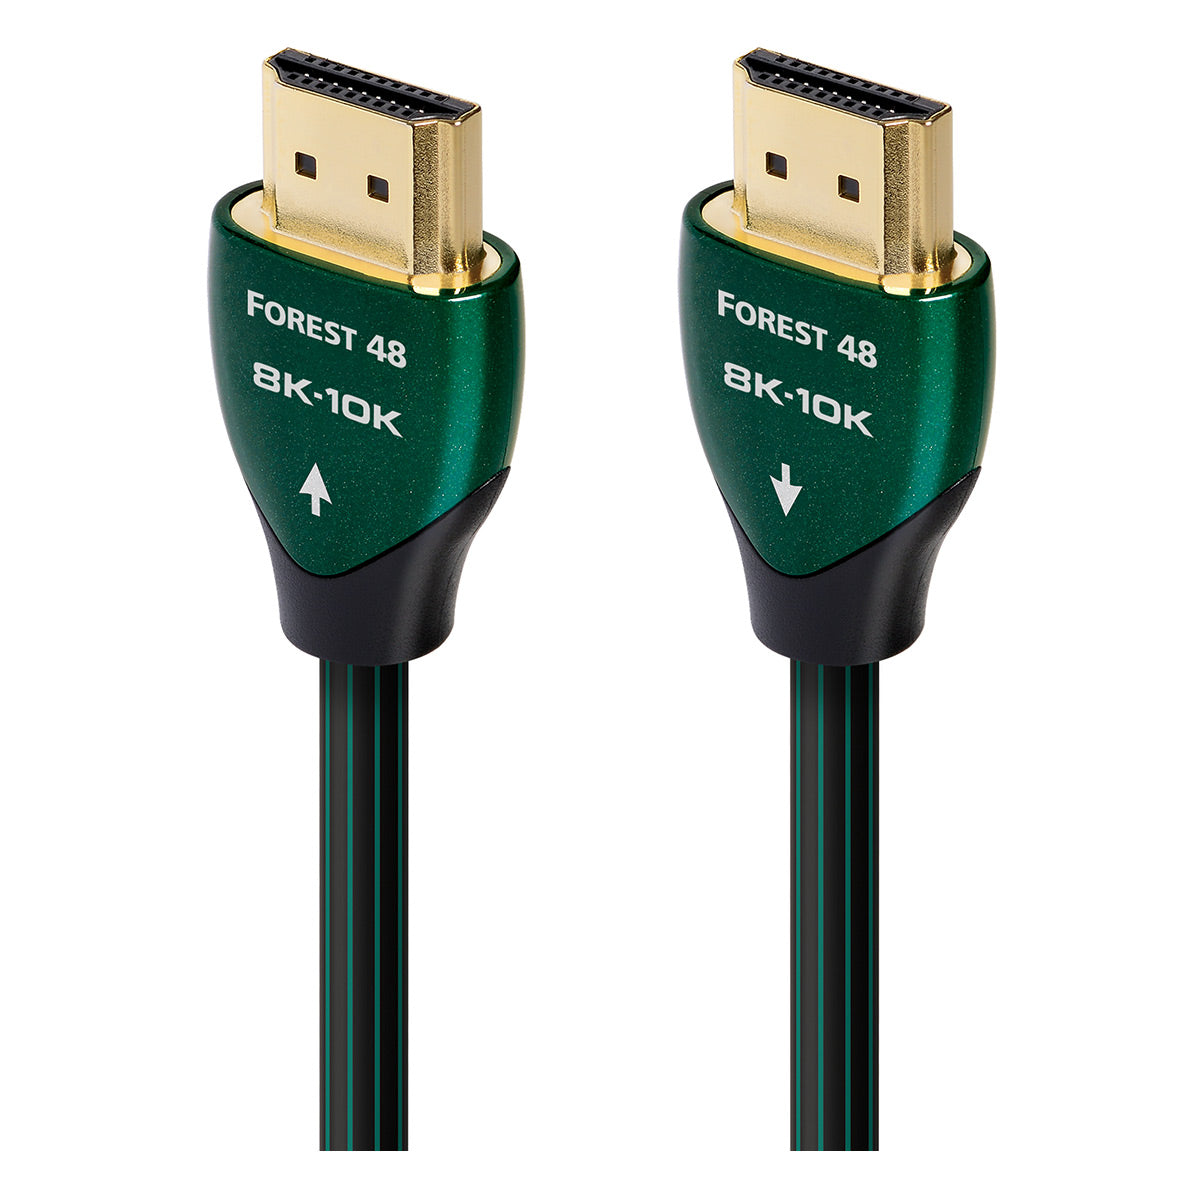 AudioQuest Forest 48 8K-10K 48Gbps Ultra High Speed HDMI Cable - 7.38 ft. (2.25m)